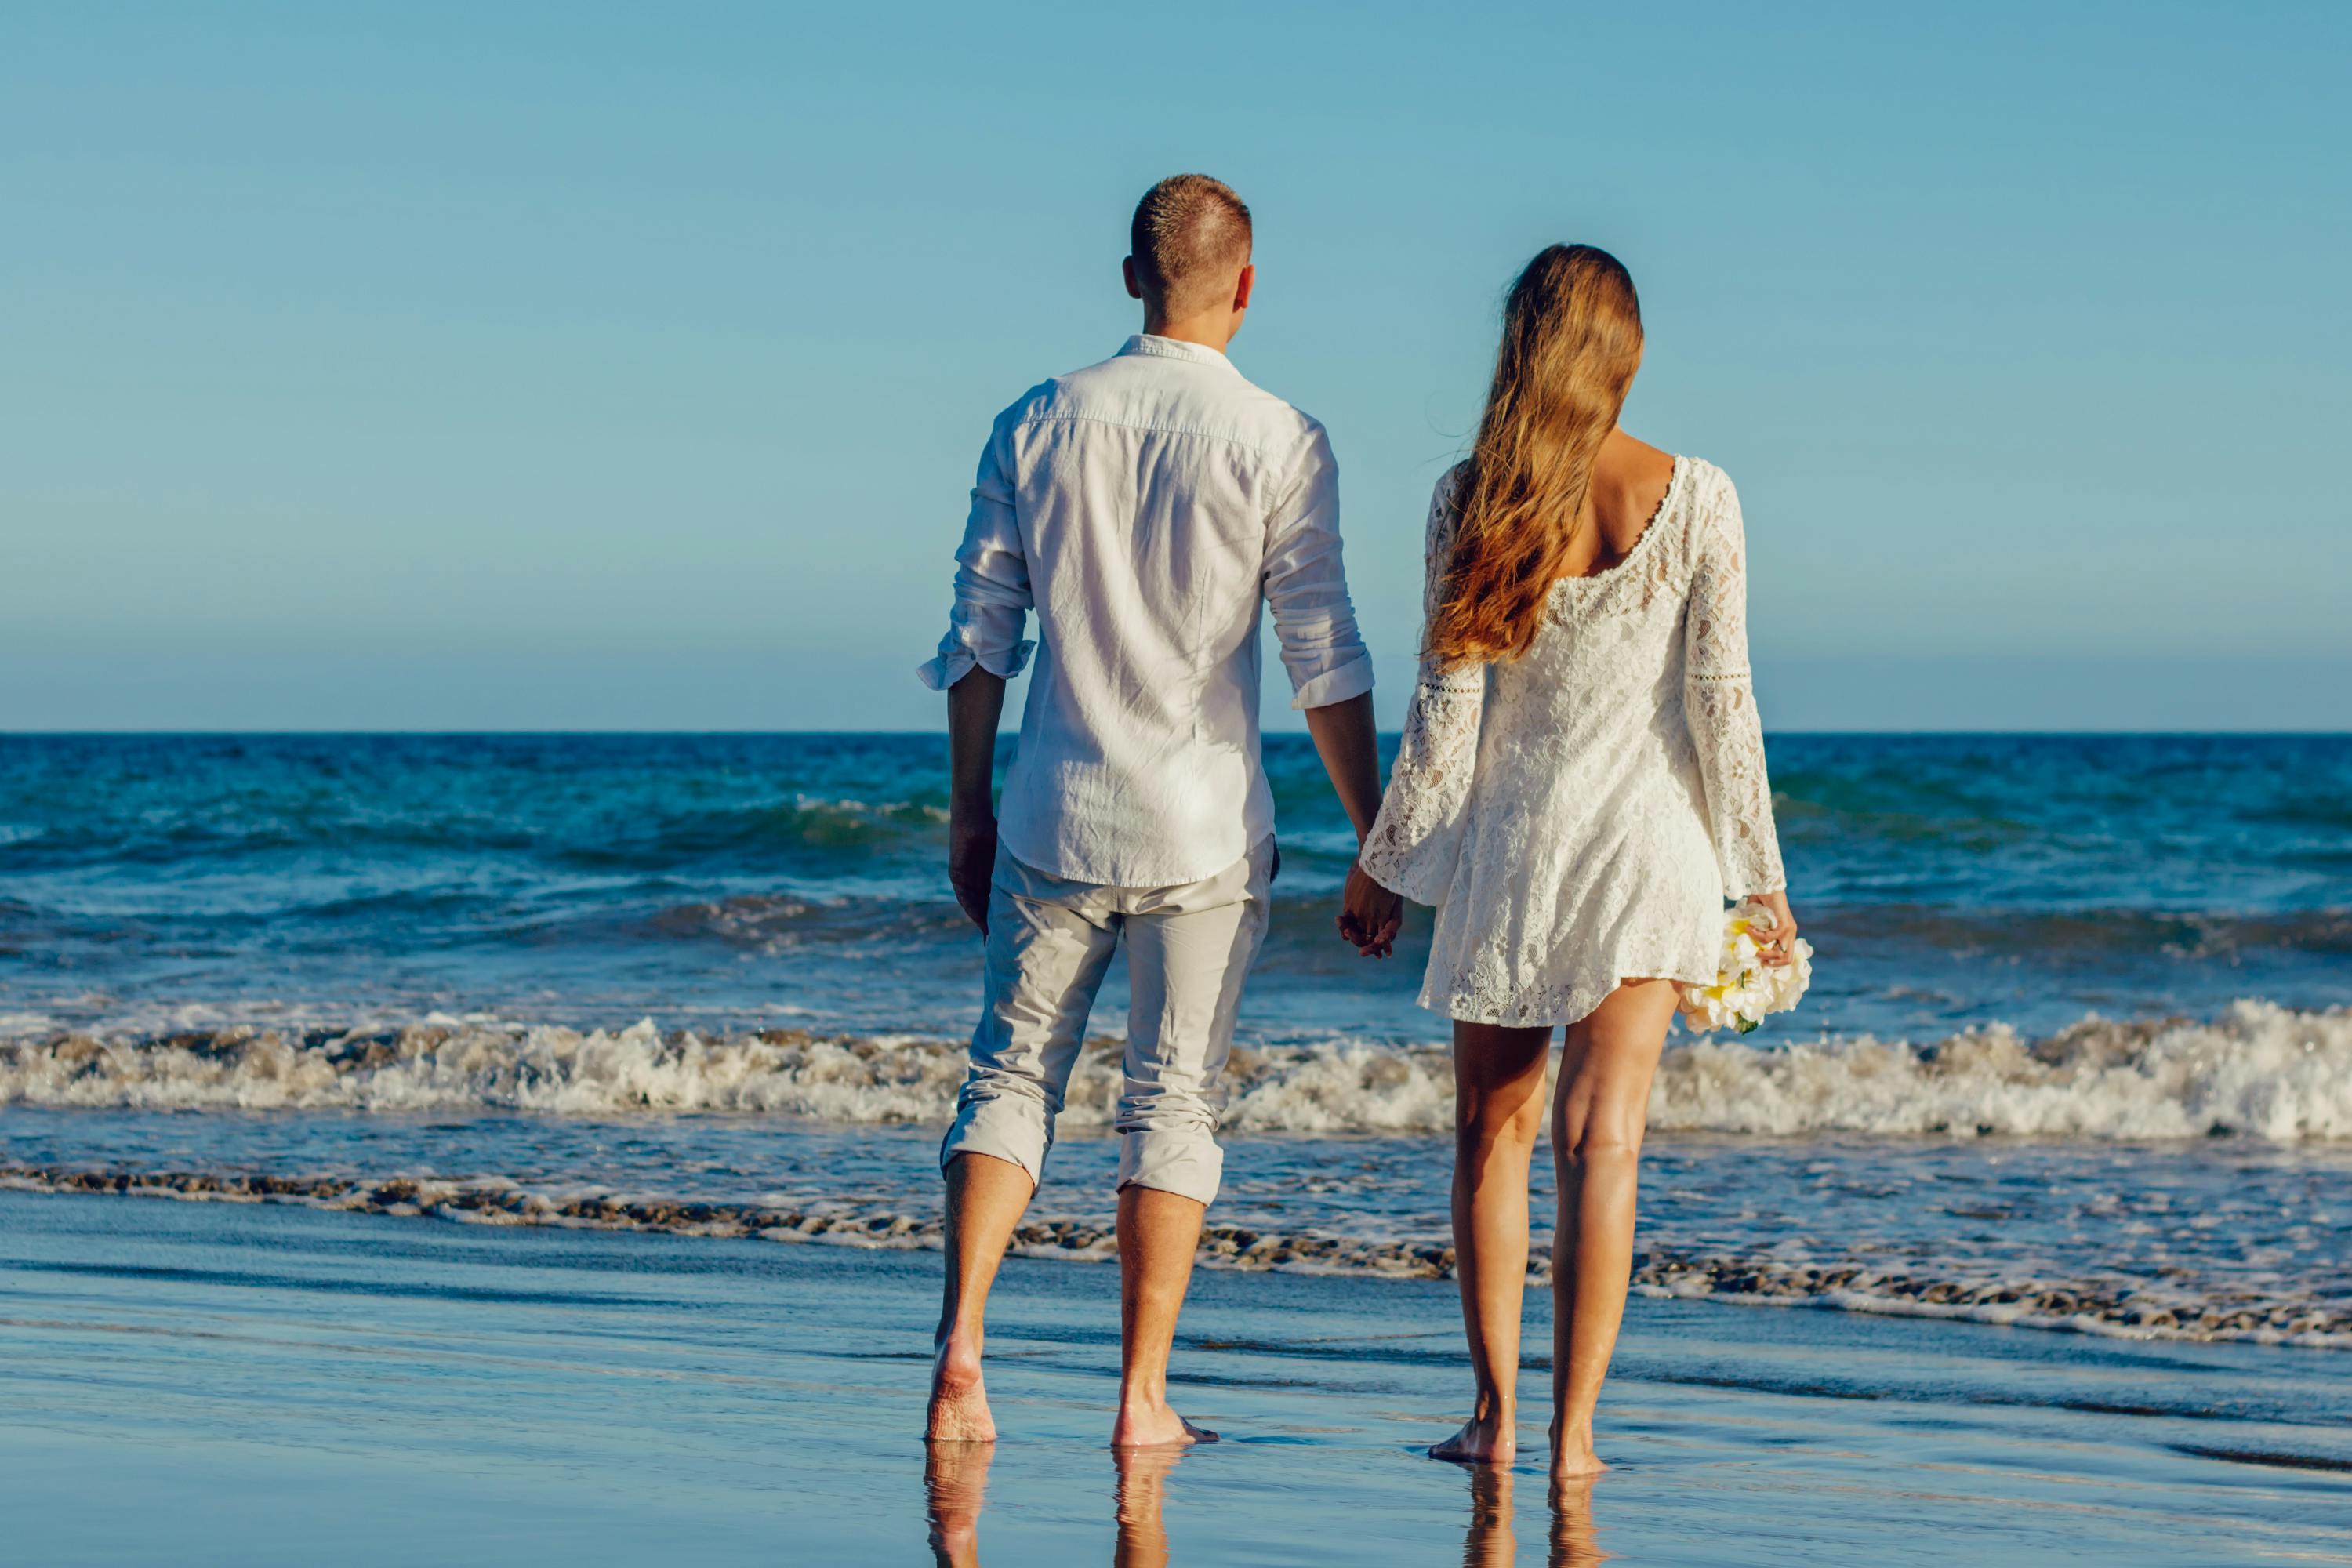 Rear View of Couple on Beach Against Clear Sky · Free Stock Photo